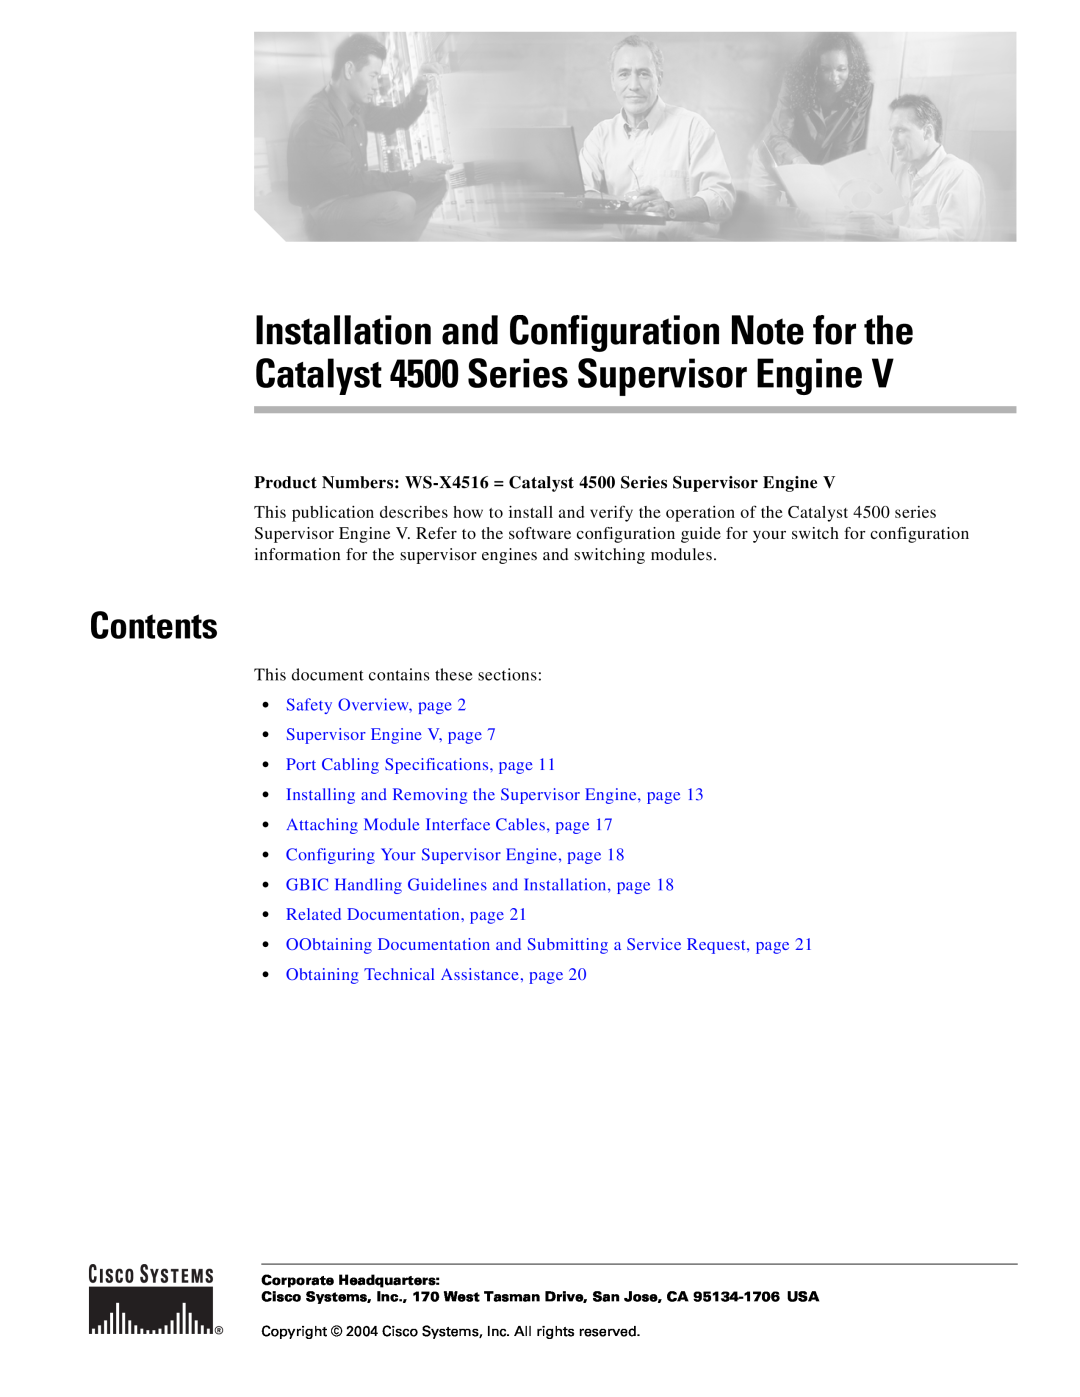 Cisco Systems specifications Contents, Product Numbers WS-X4516 = Catalyst 4500 Series Supervisor Engine 